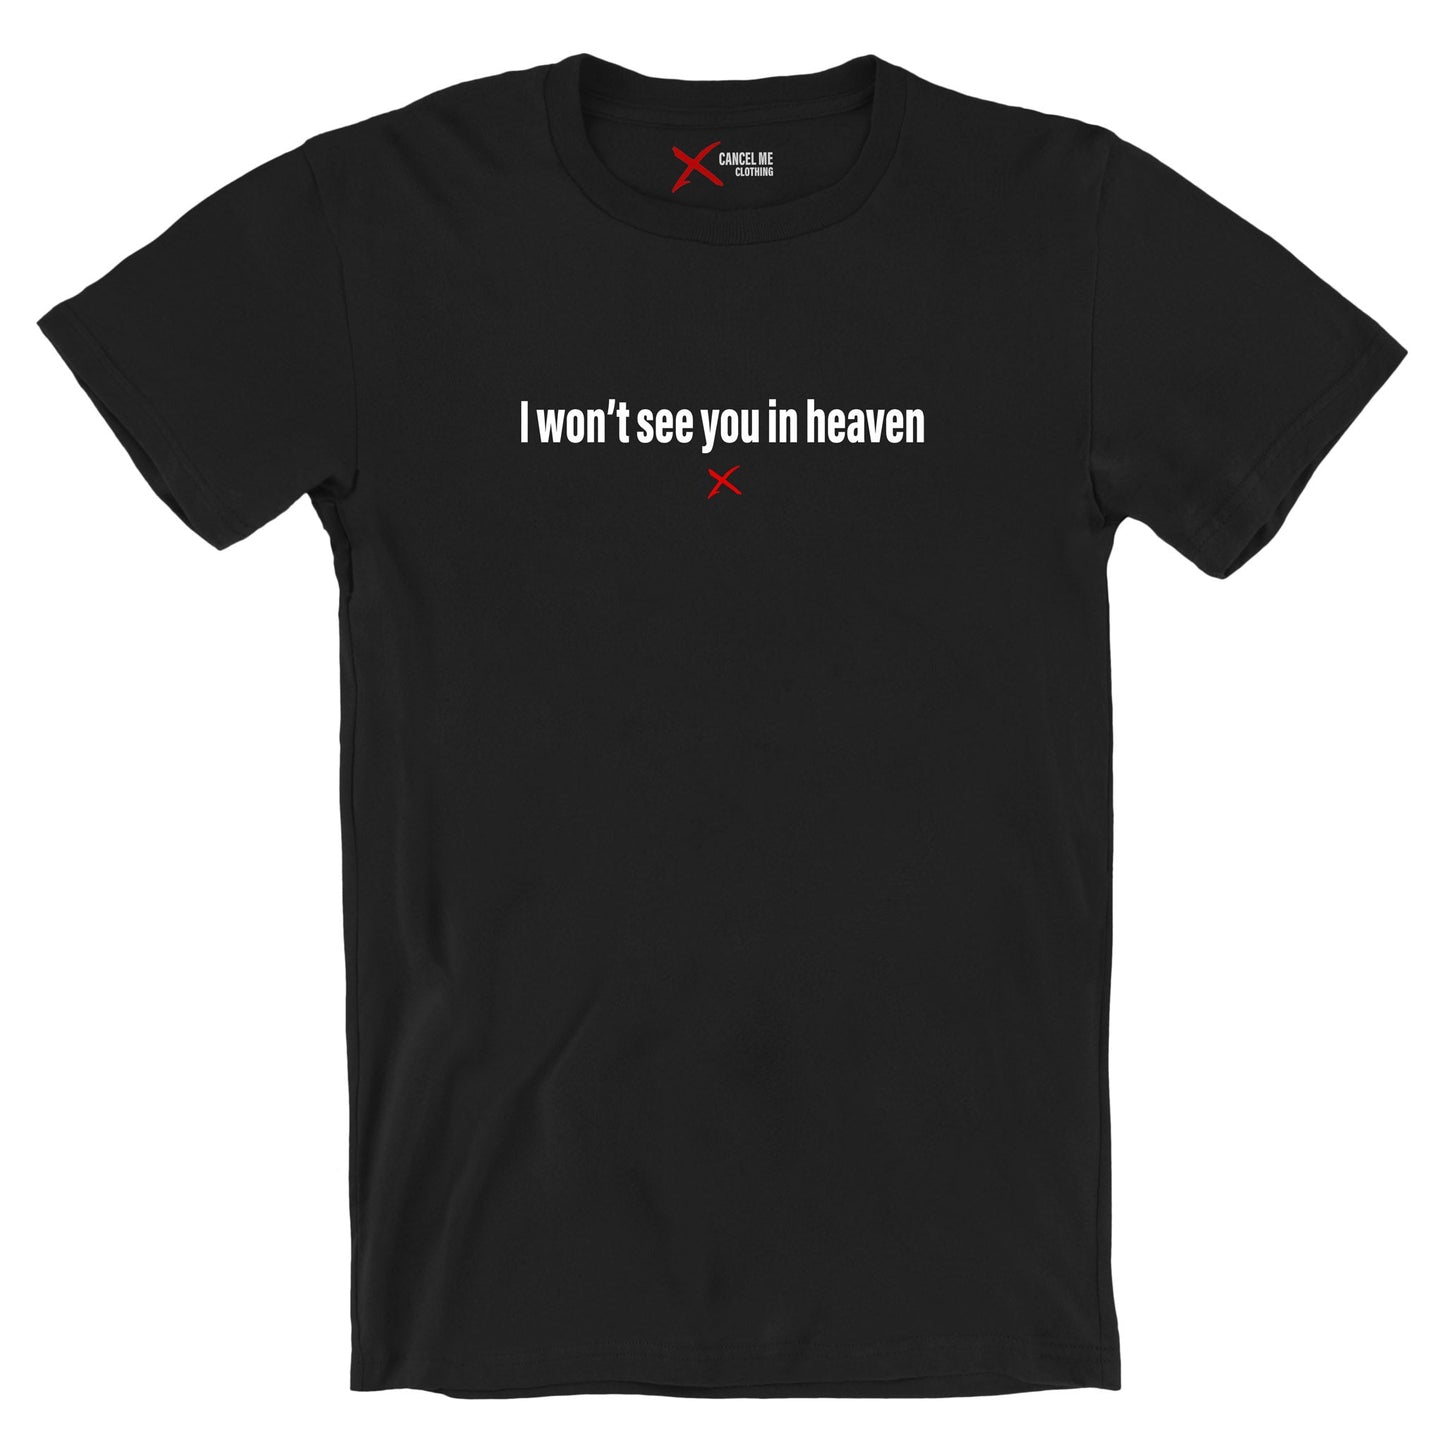 I won't see you in heaven - Shirt